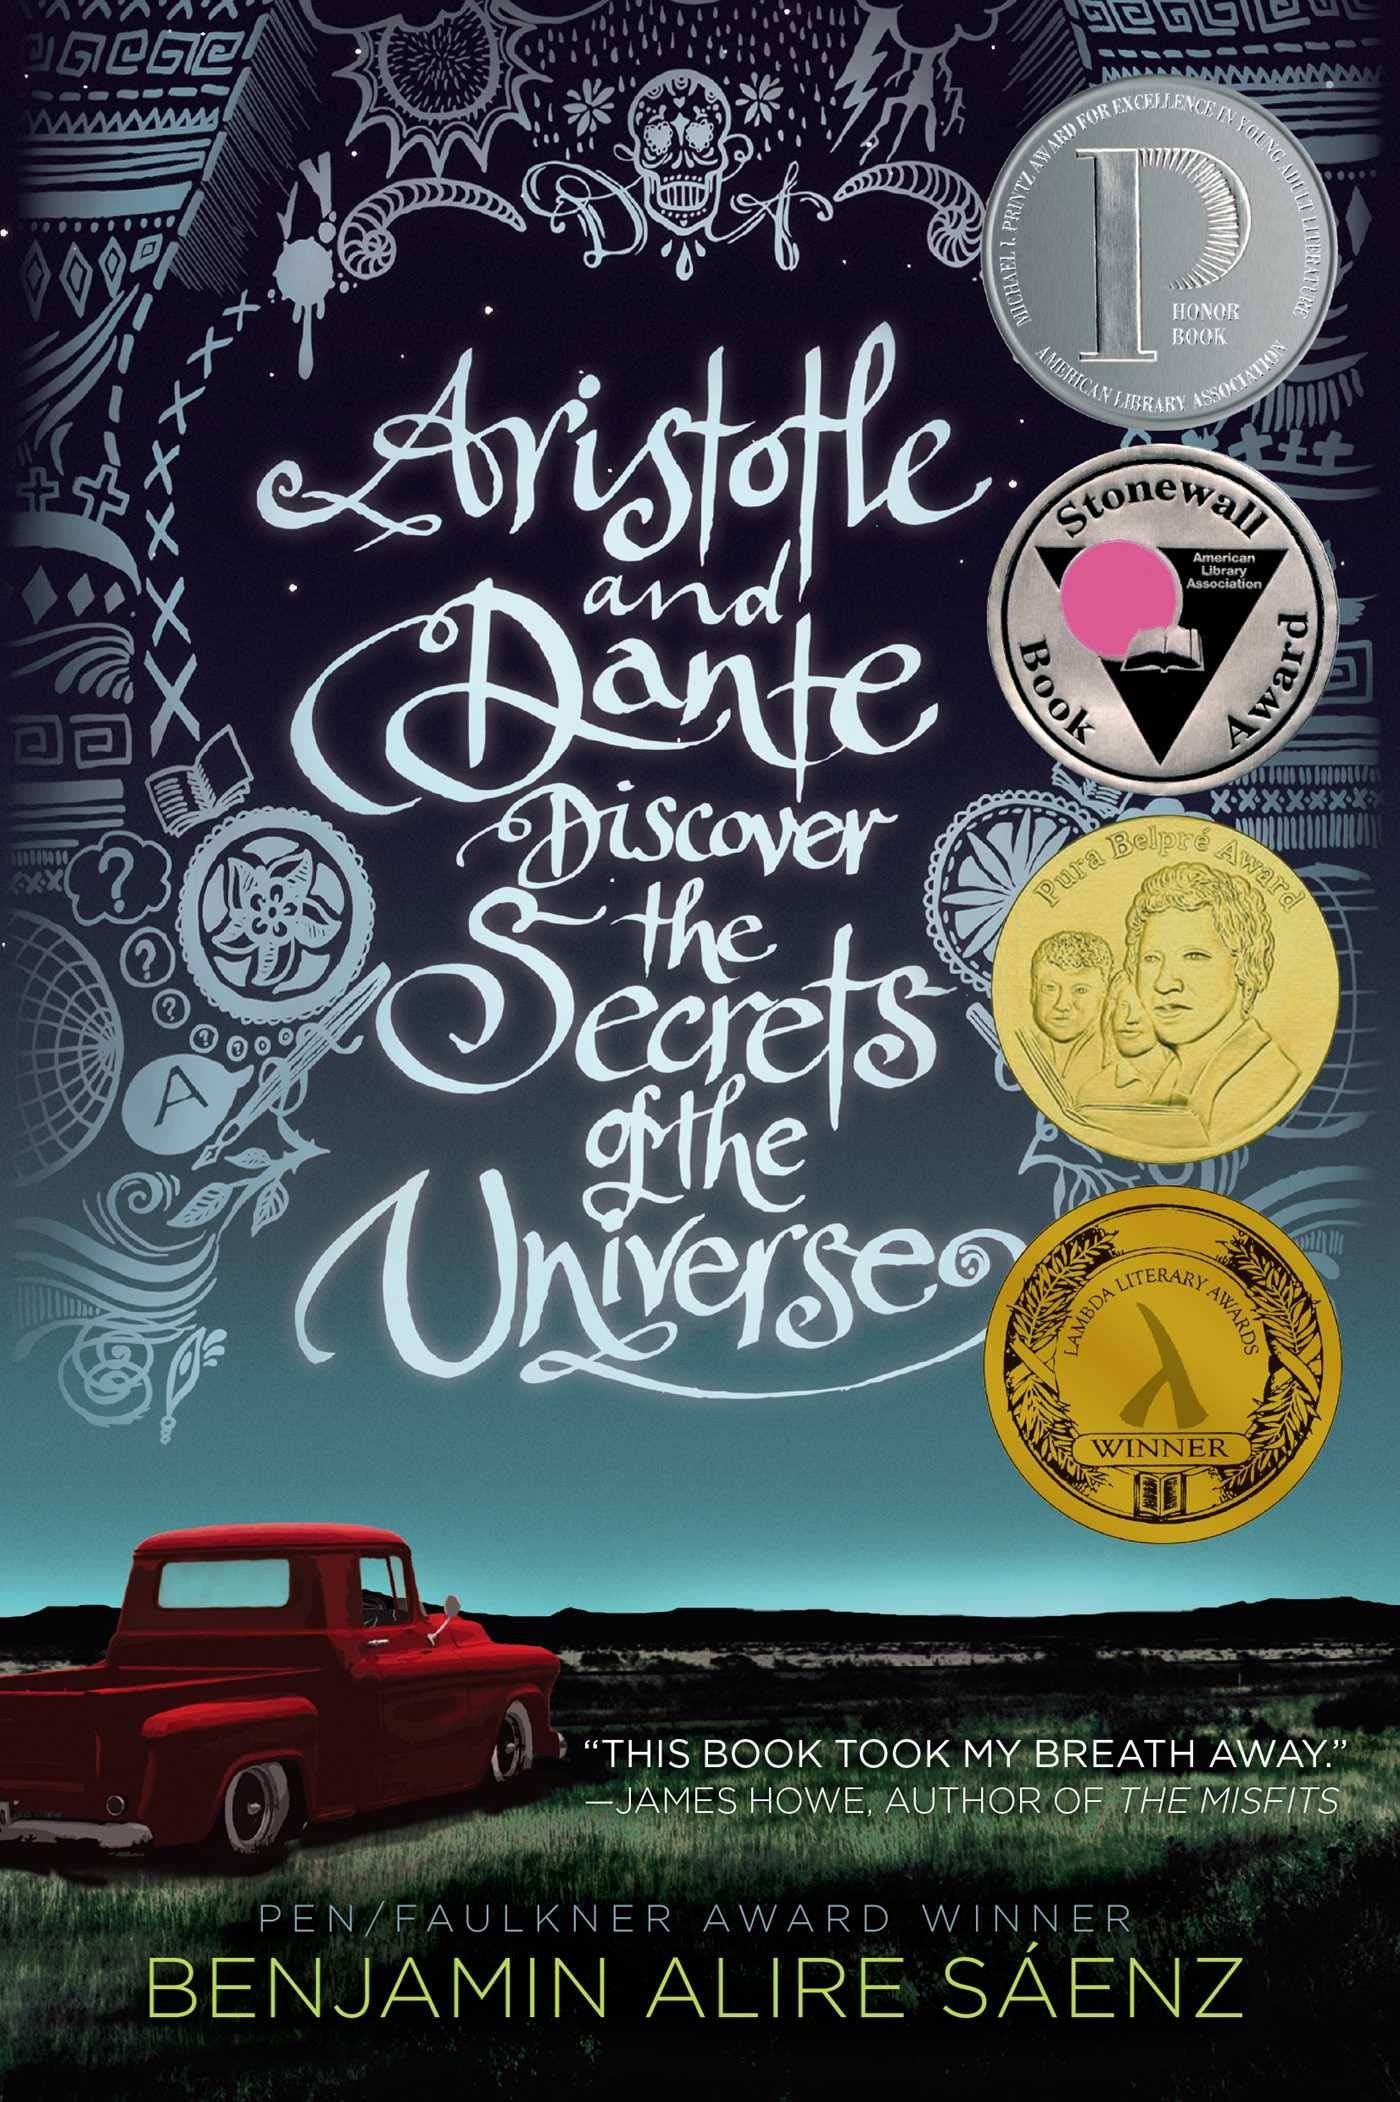 "Aristotle and Dante discover the secrets of the universe" cover featuring an illustration of a vintage red truck looking out over a field with an open sky filled with geometric and symbolic illustrations.